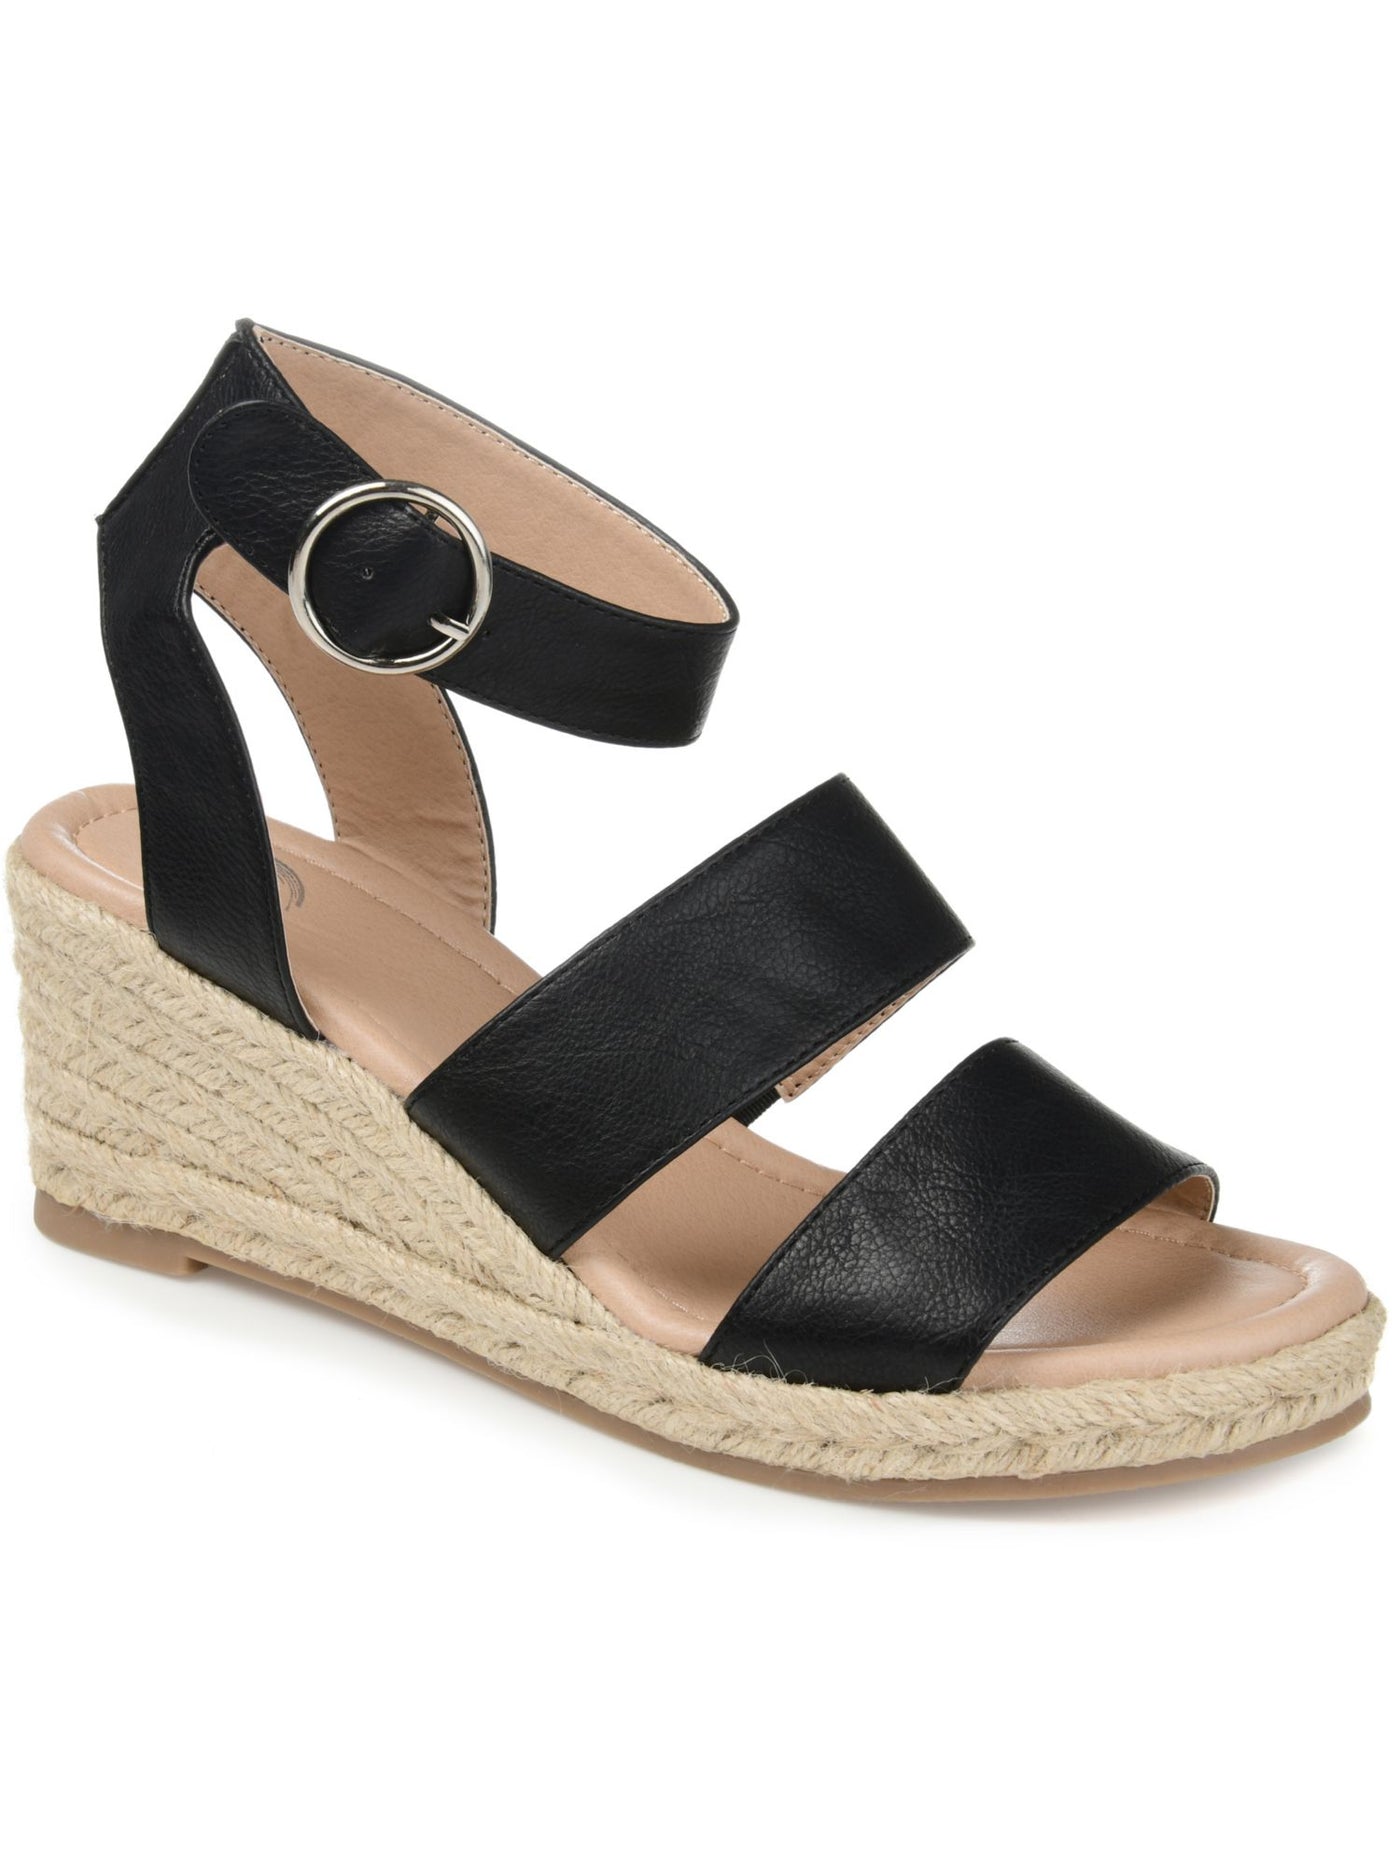 JOURNEE COLLECTION Womens Black Cushioned Nora Open Toe Wedge Buckle Espadrille Shoes 9